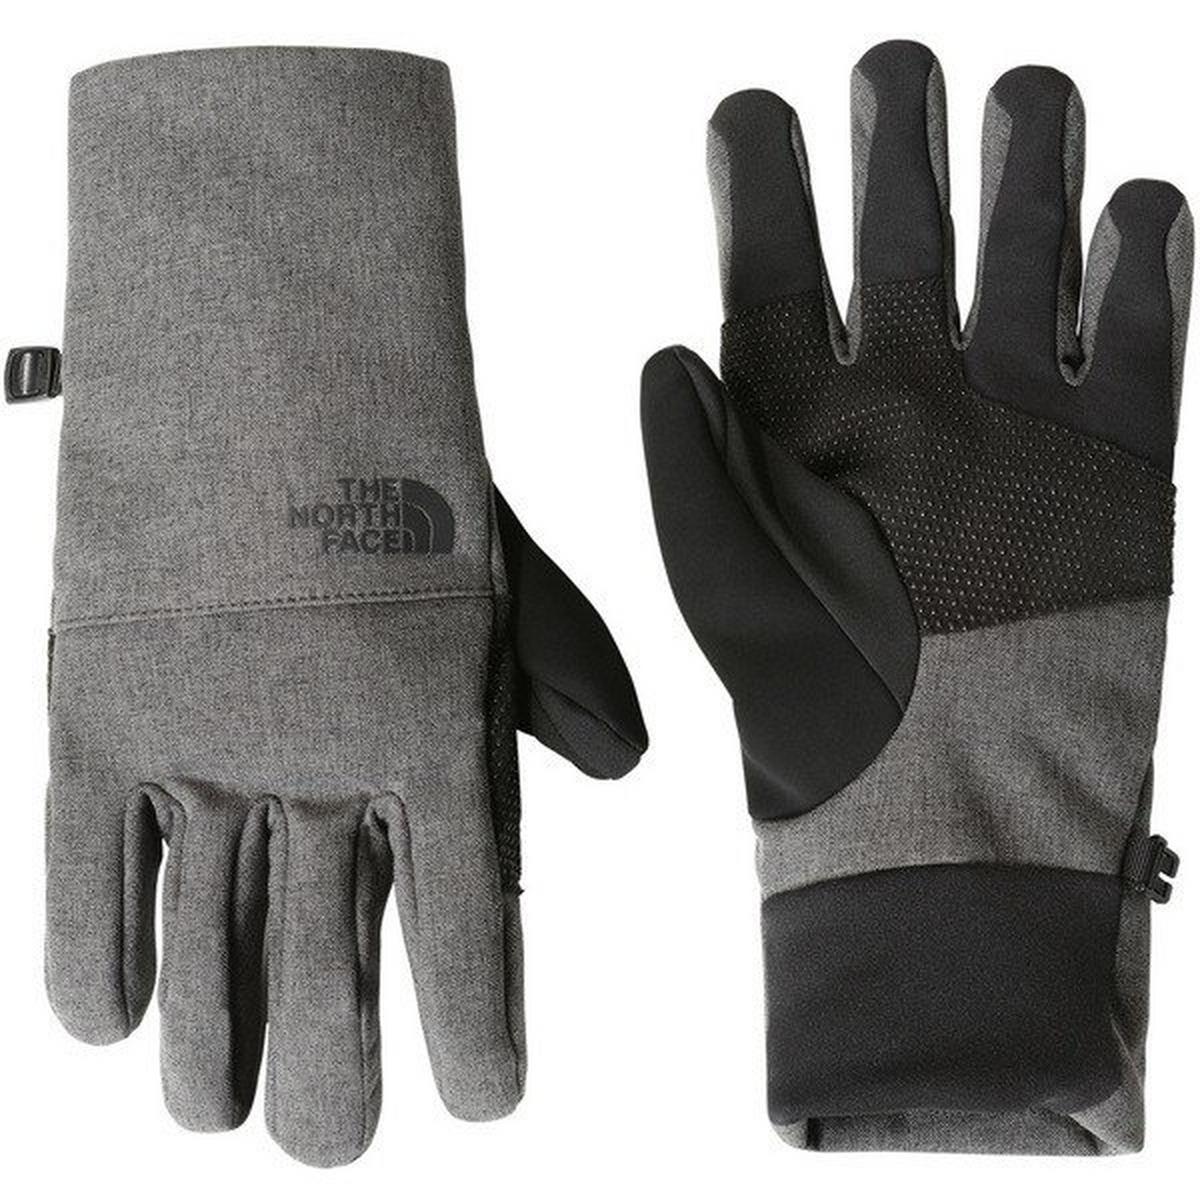 The North Face Men's Apex Insulated Etip Glove - TNF Grey/Heather